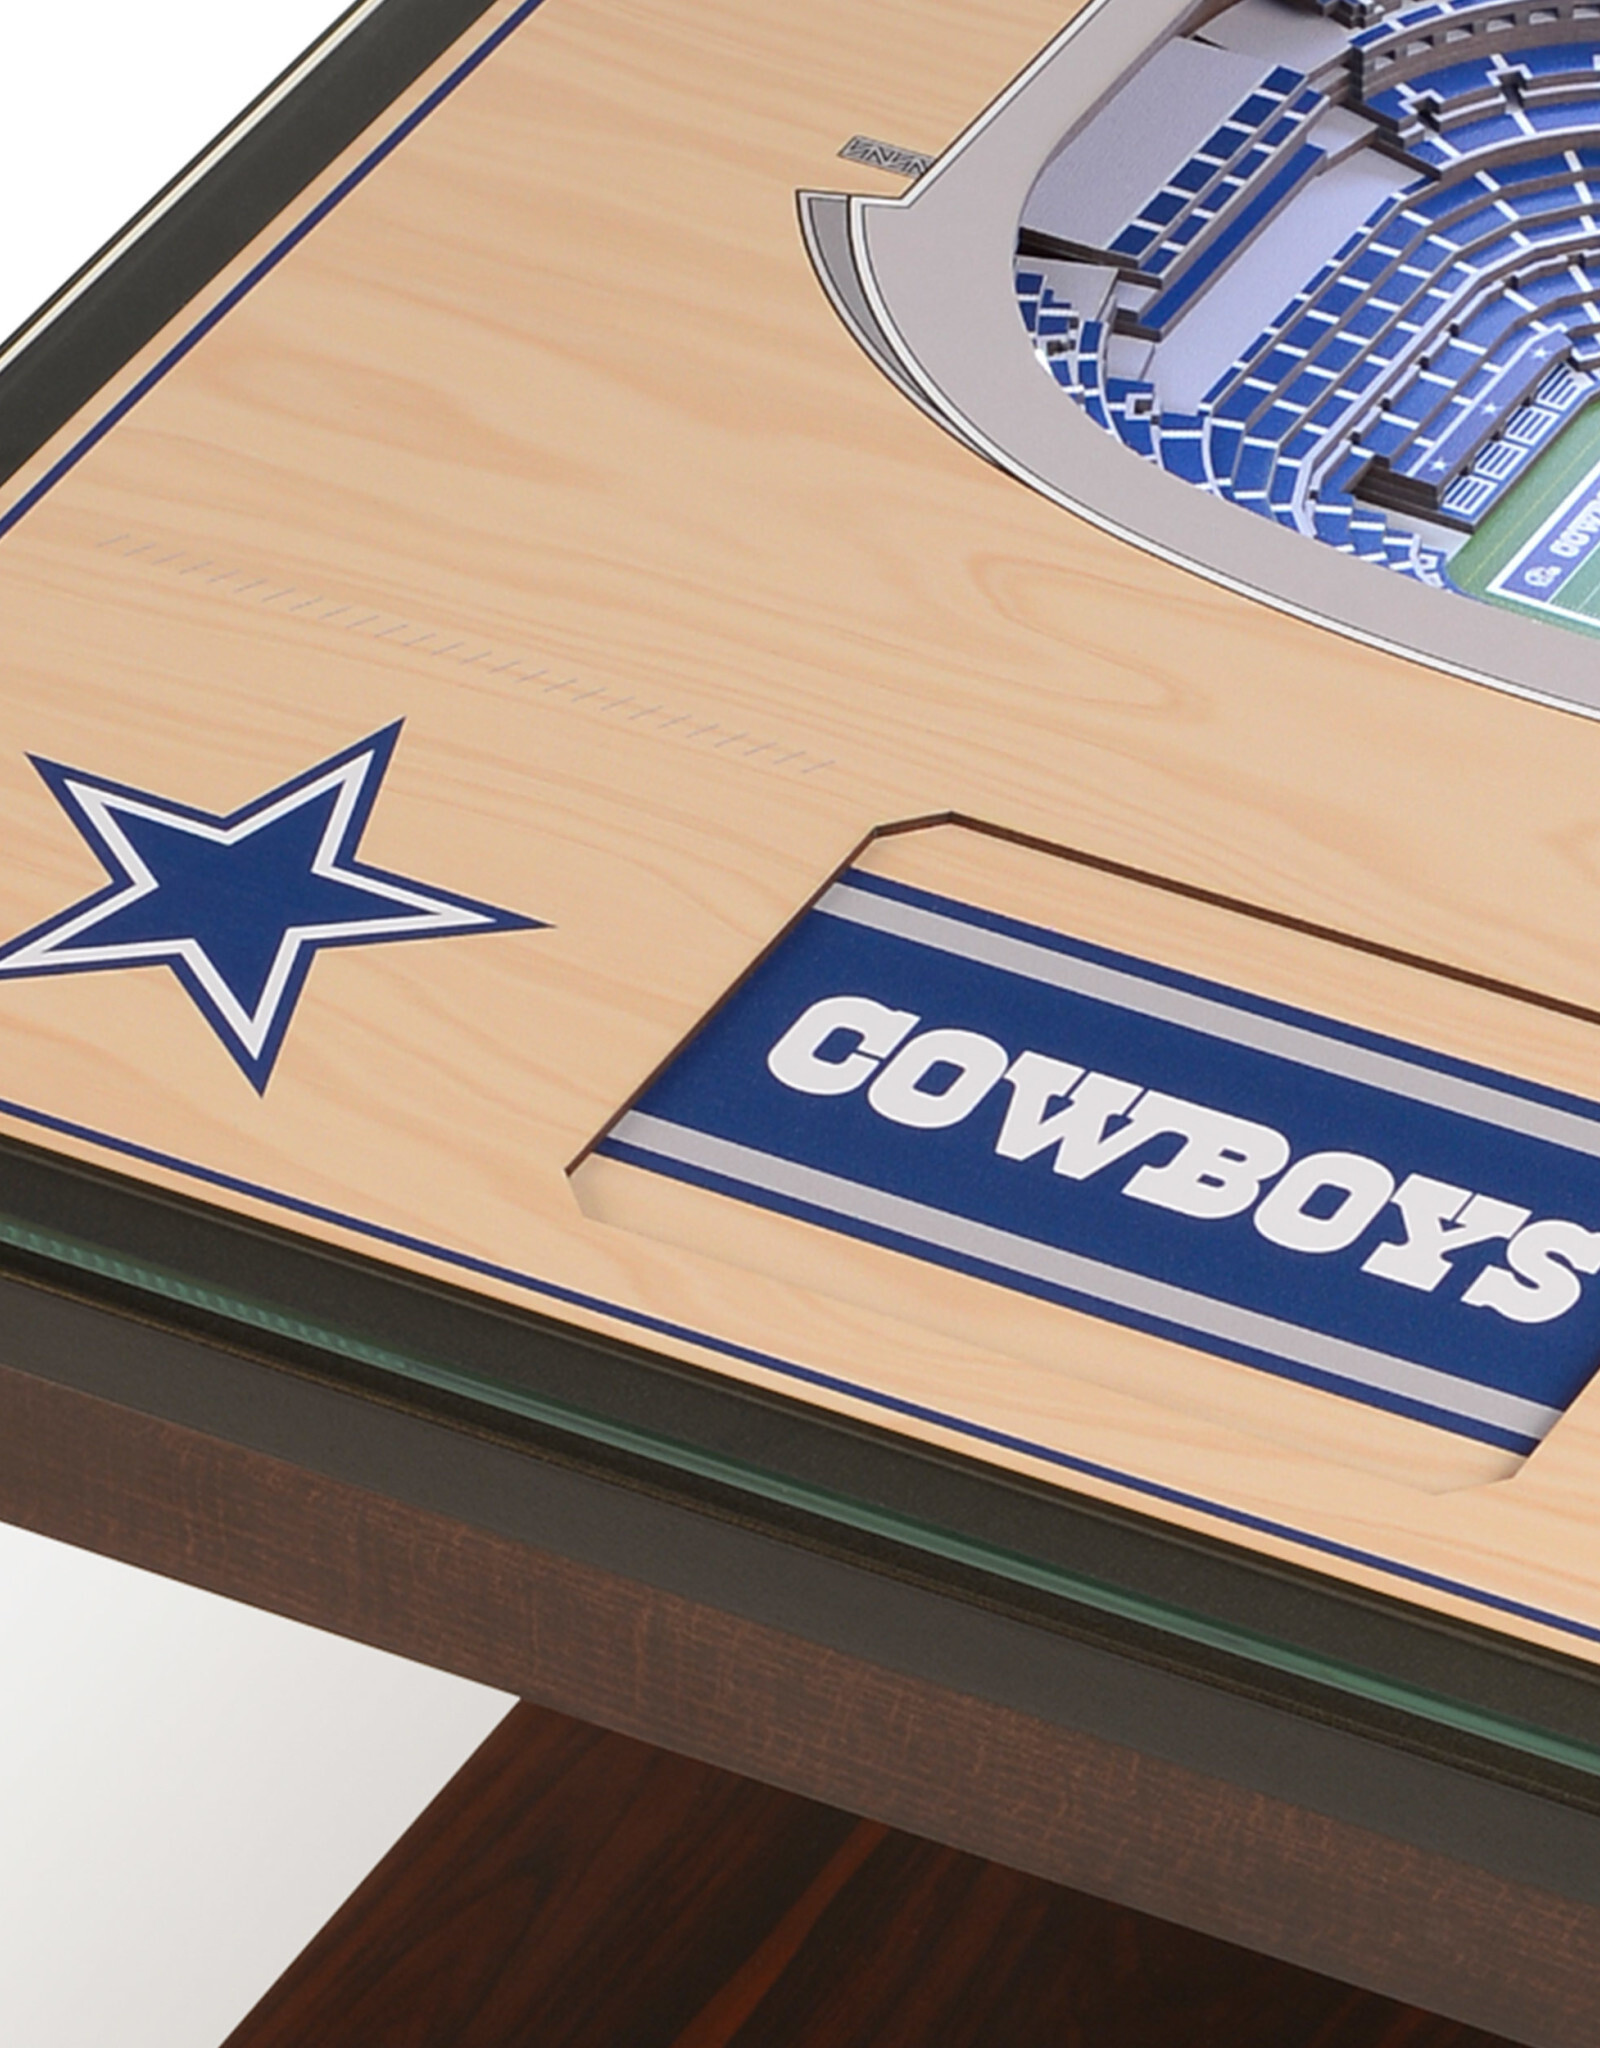 YOU THE FAN Dallas Cowboys 25-Layer LED StadiumView End Table